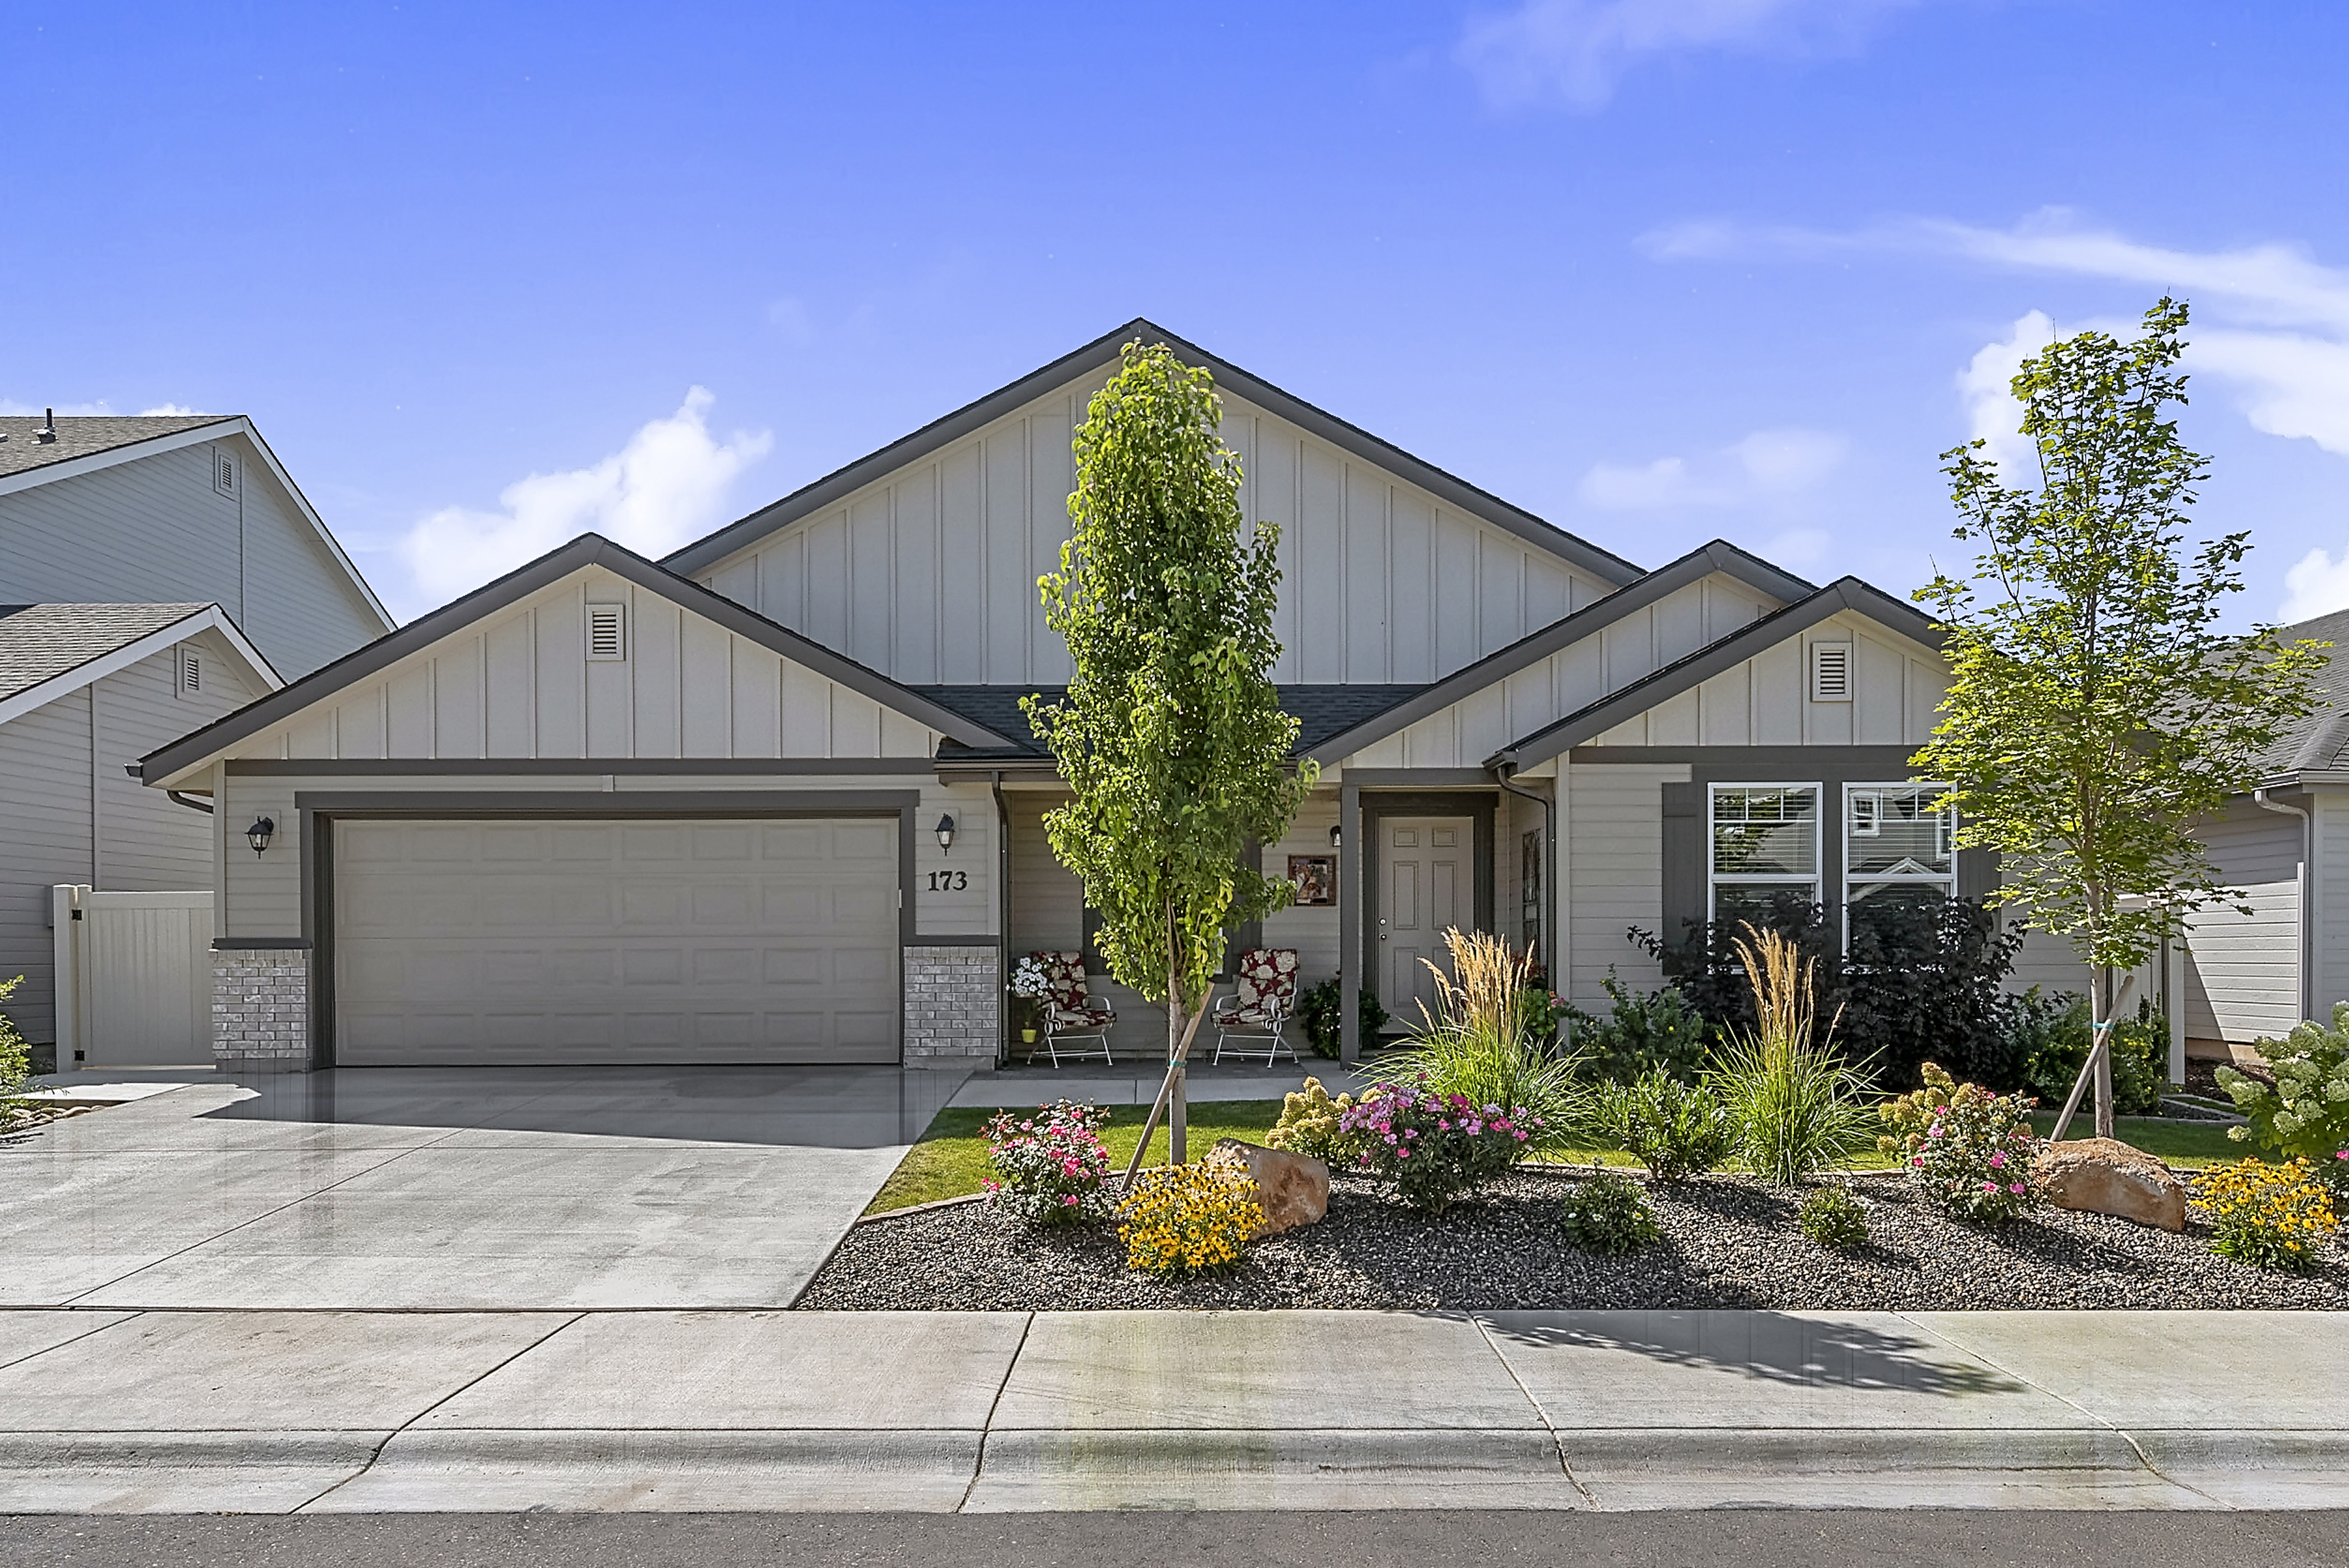 NOW SOLD in White's Acres! 173 W Yosemite St, Meridian ID 83646